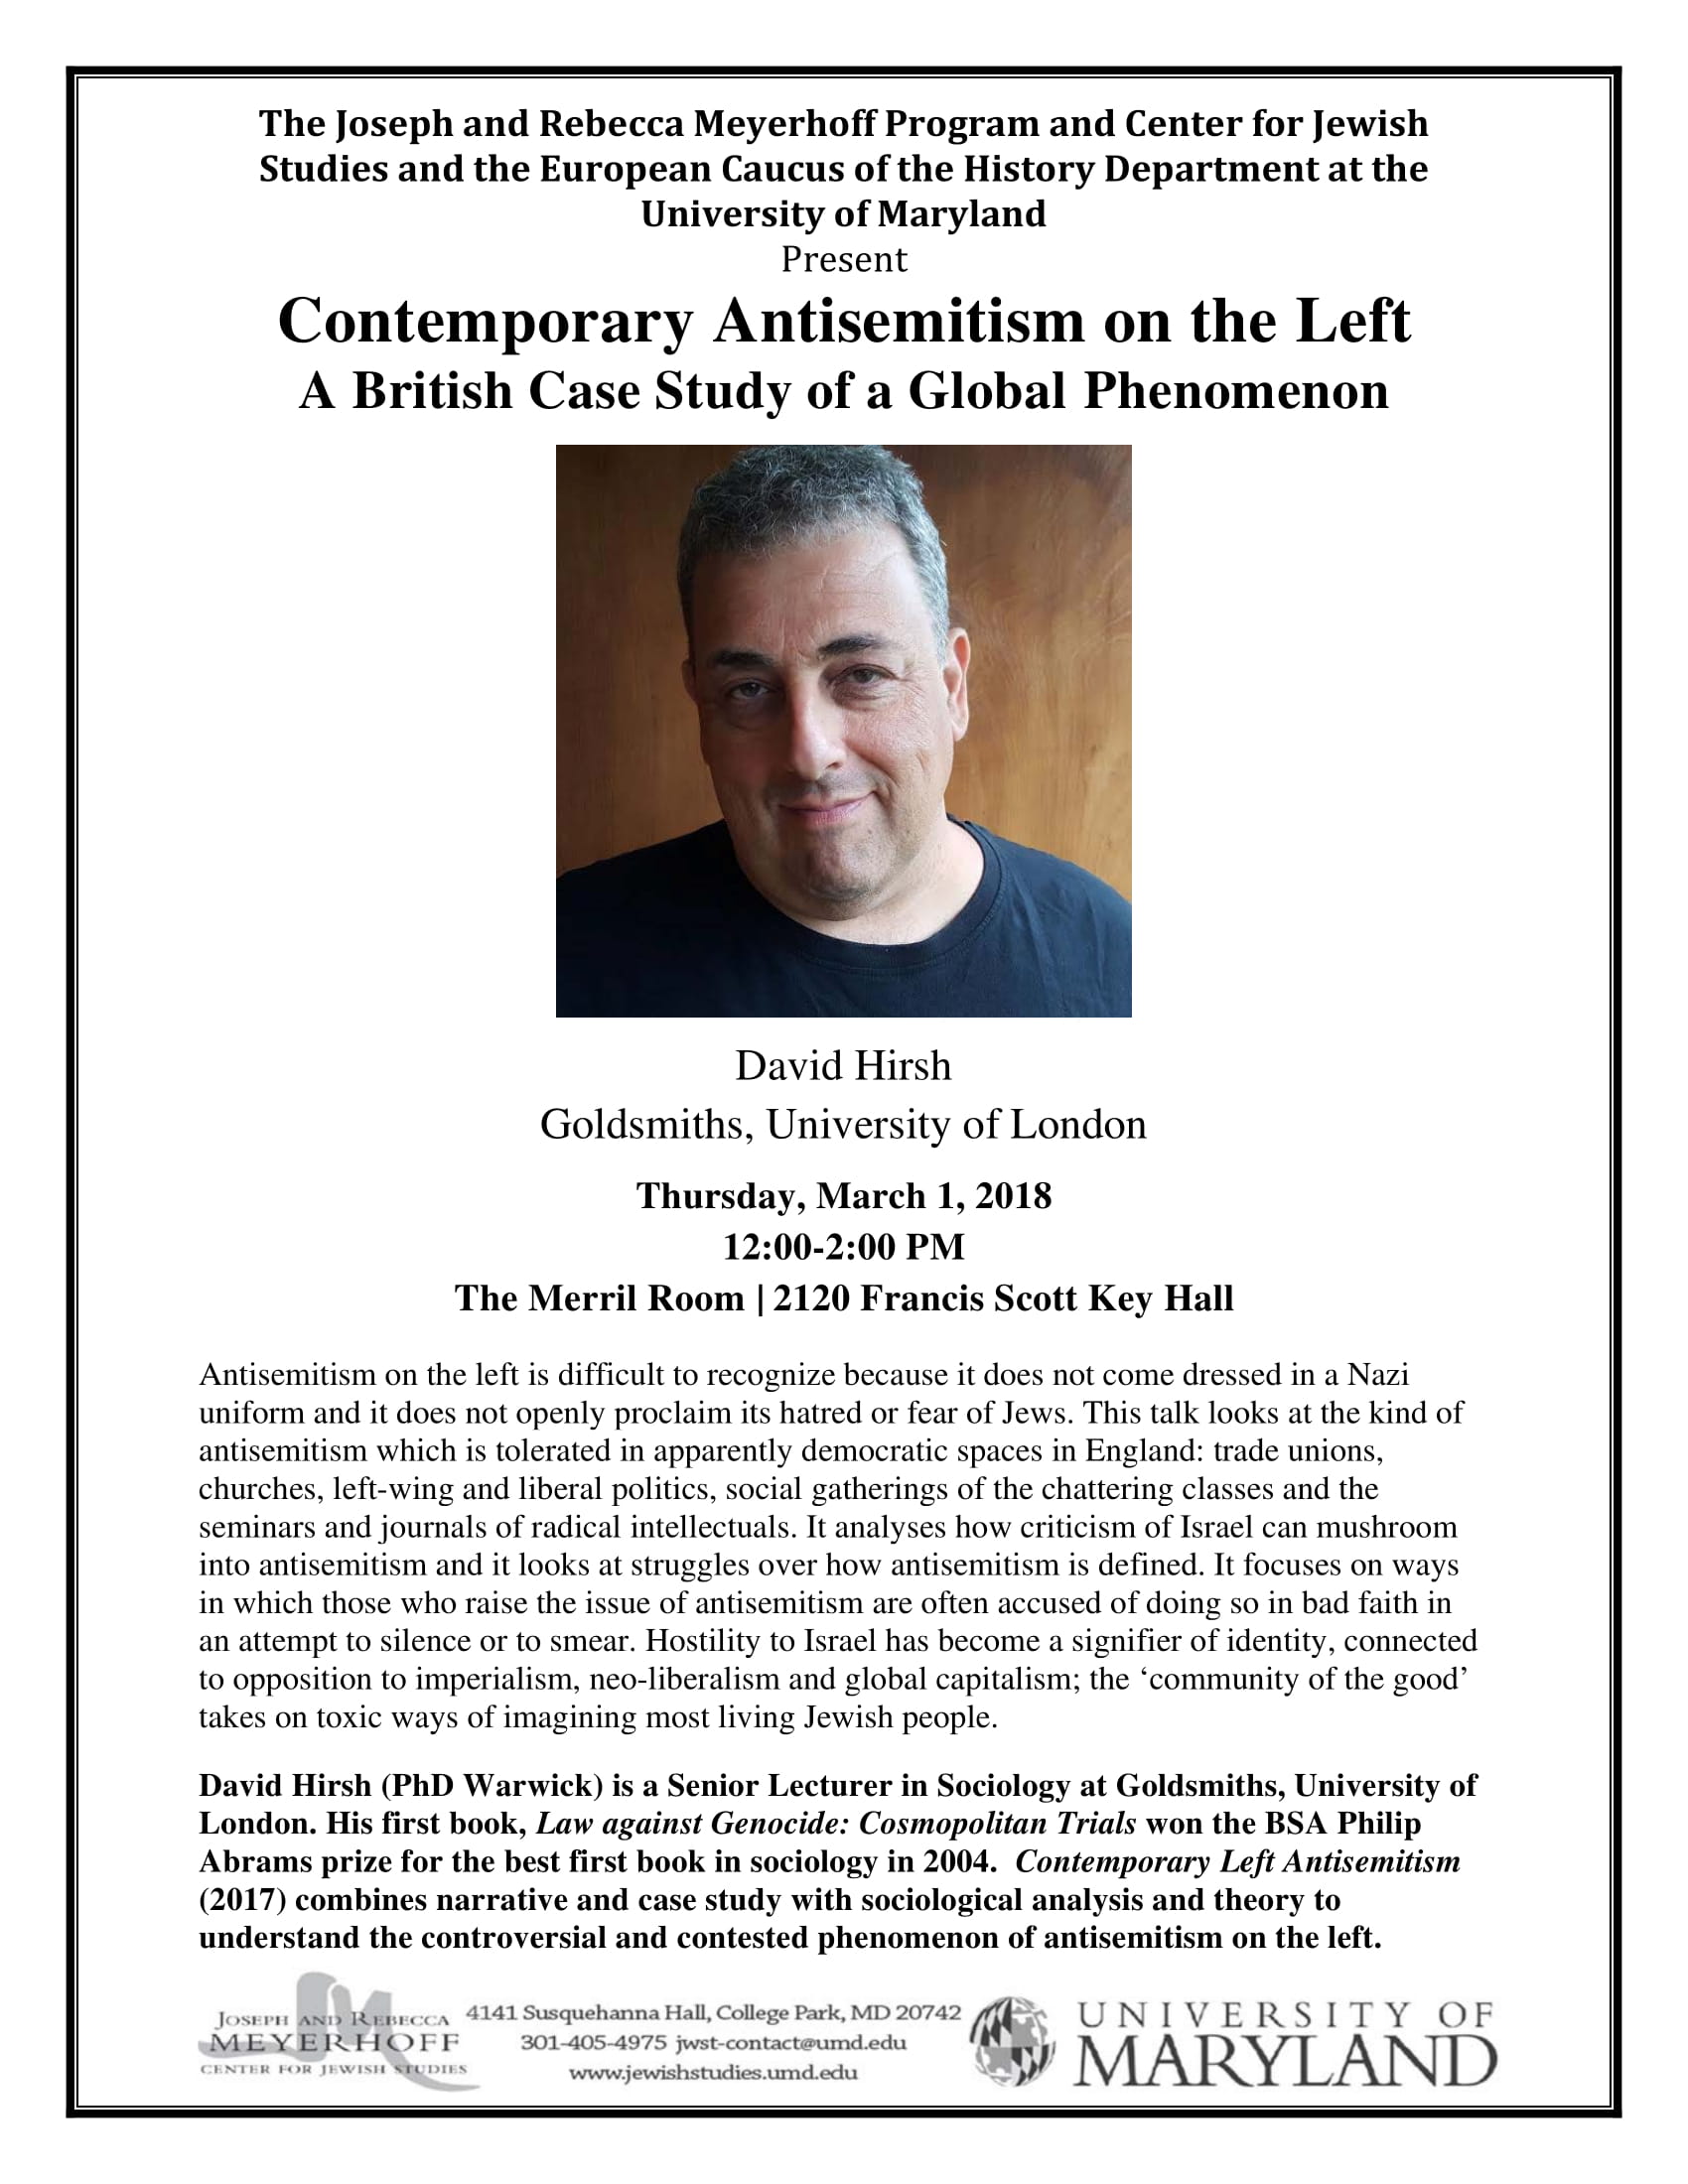 Poster for Contemporary Antisemitism on the Left A British Case Study of a Global Phenomenon